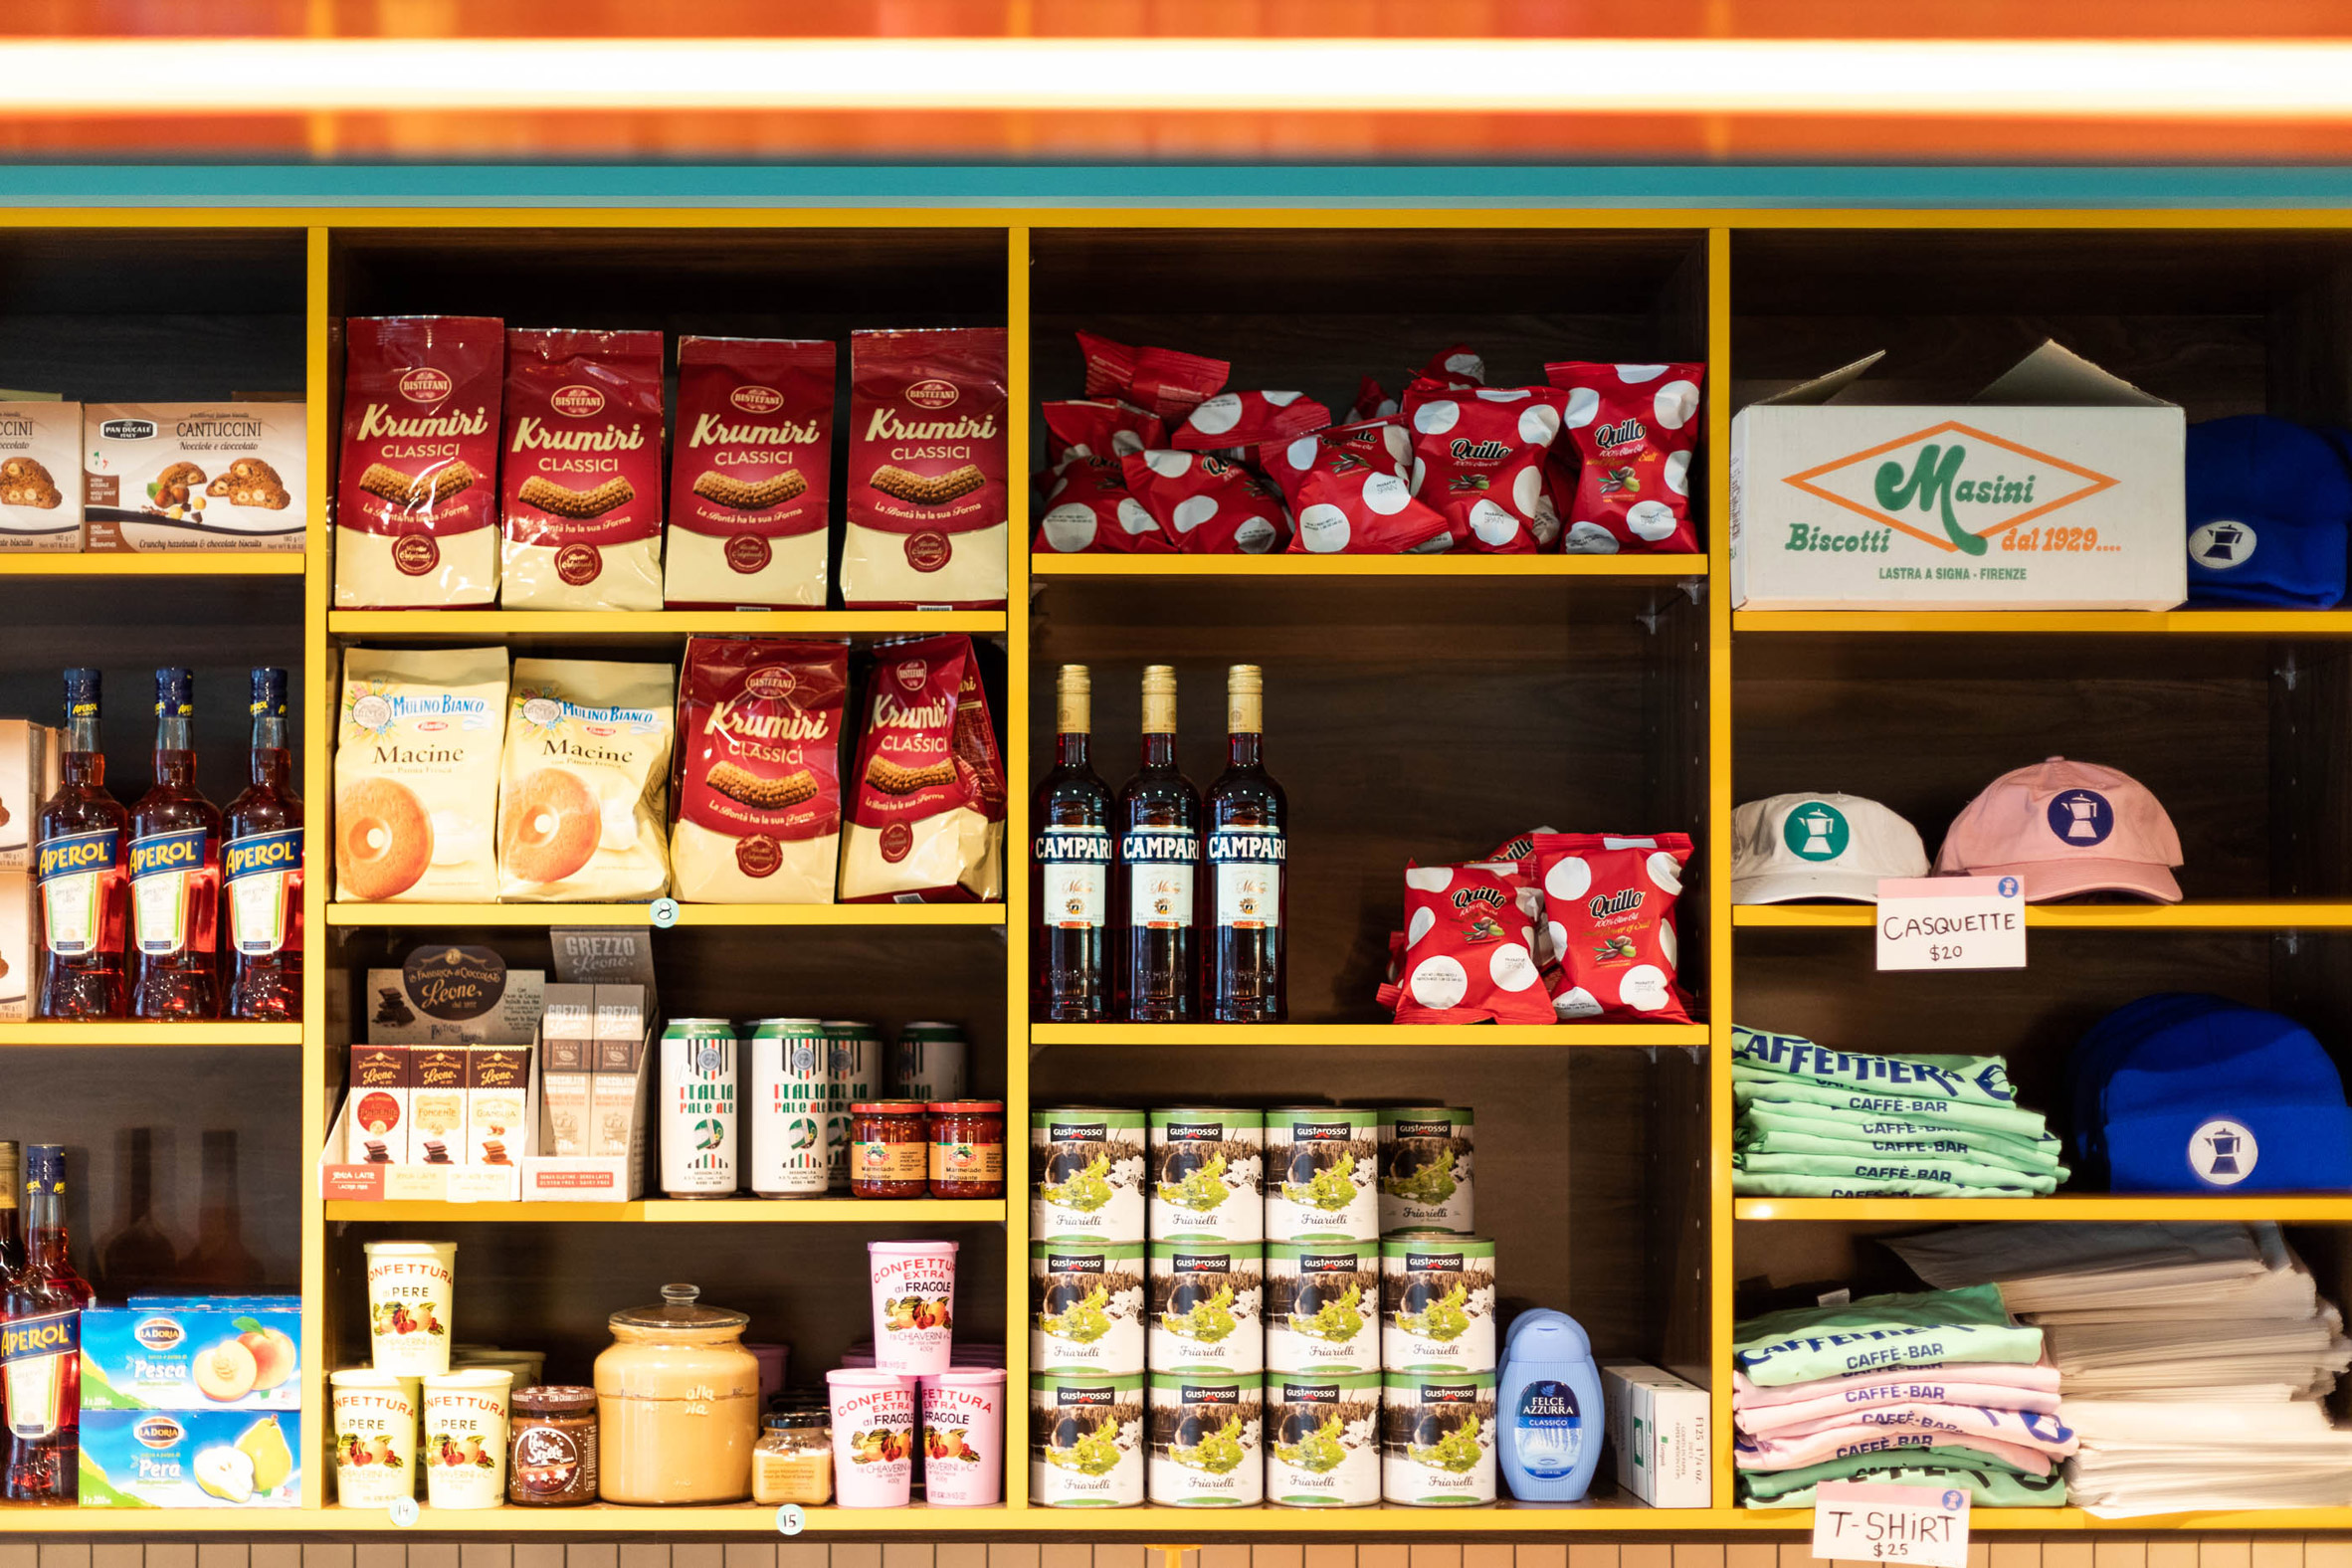 Traditional Italian food products and Caffettiera cafe merchandise